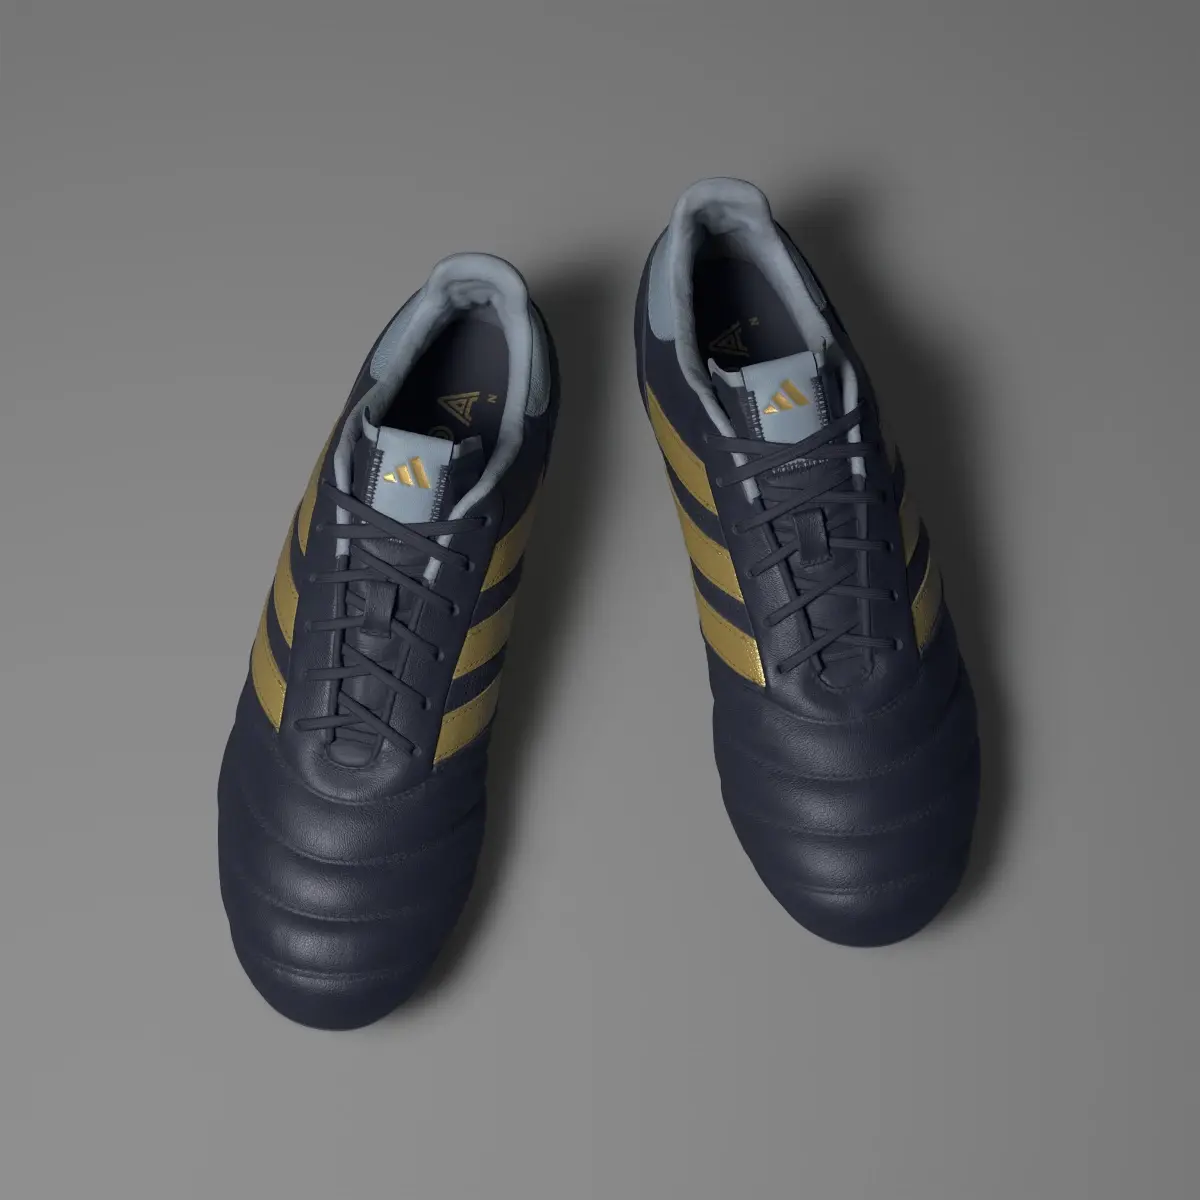 Adidas Copa Icon Firm Ground Boots. 3